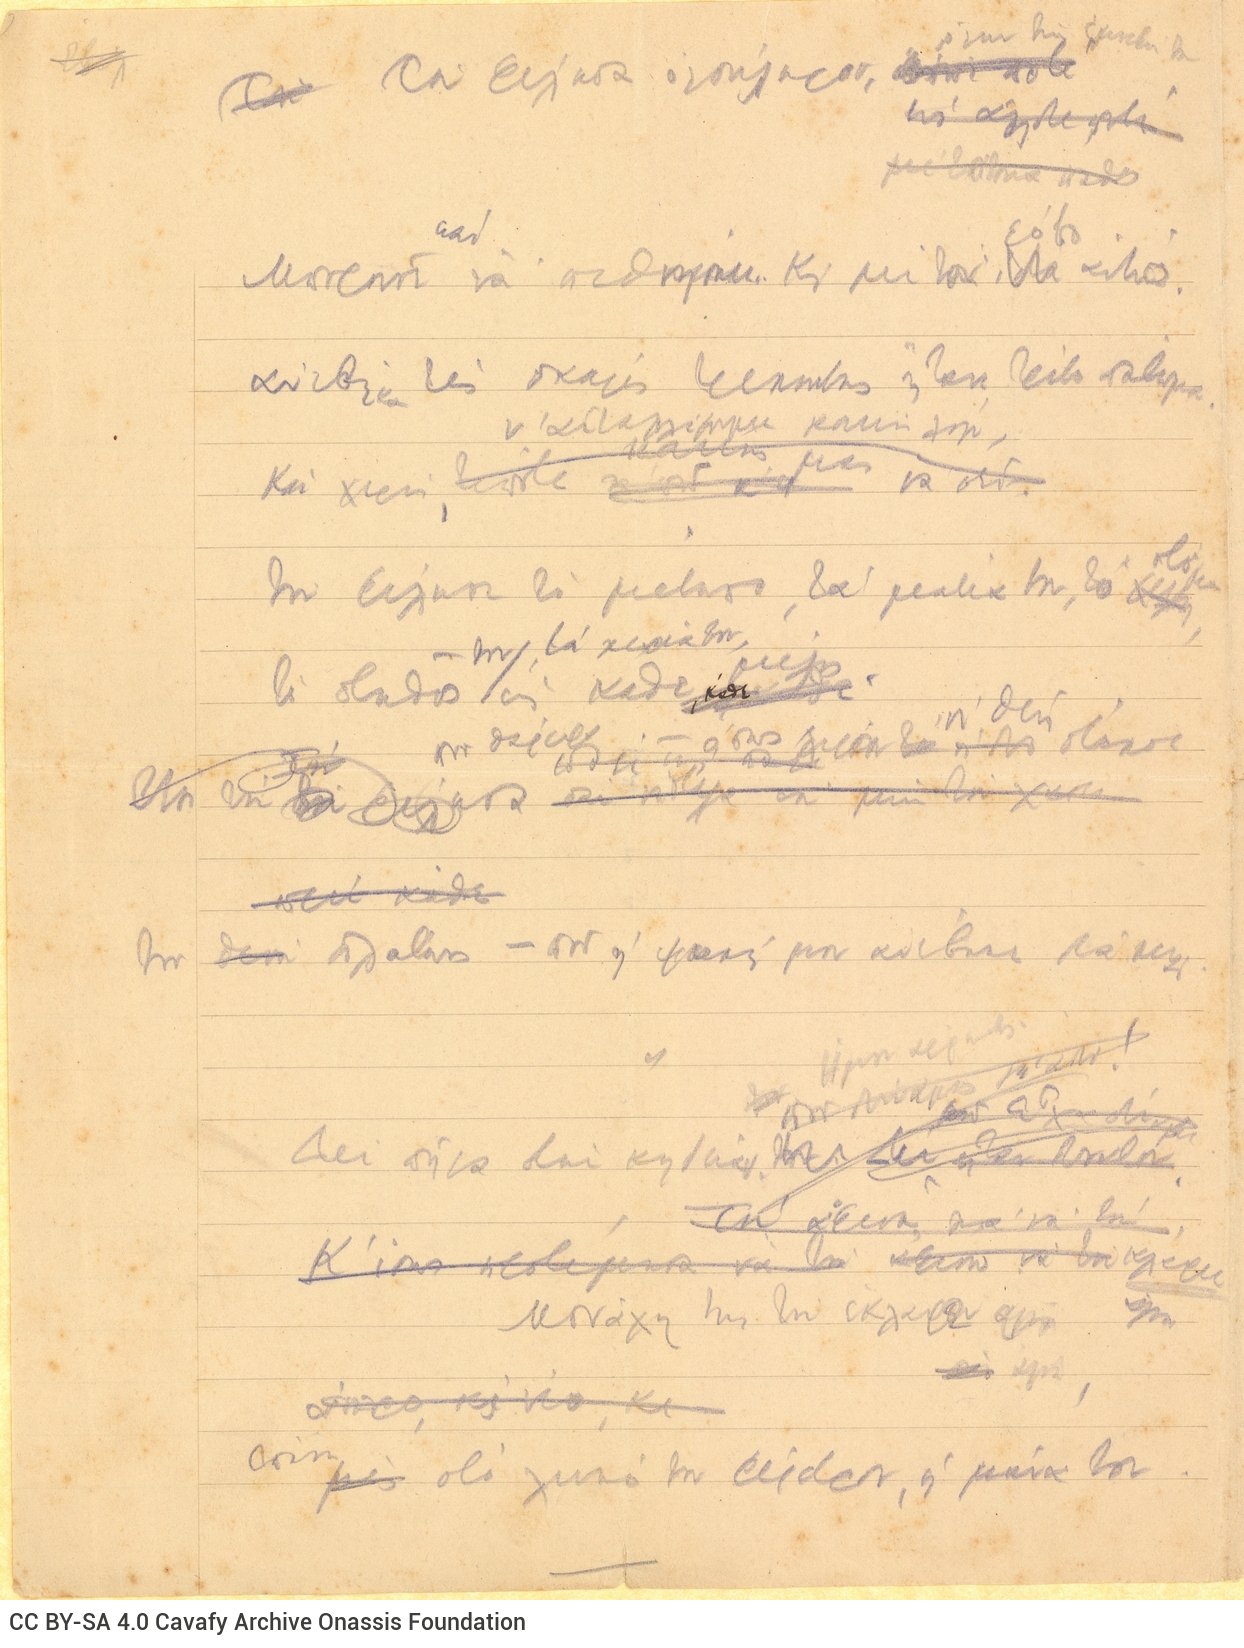 Handwritten draft of a poem on one side of a sheet (and handwritten note on its verso) as well as in two pages of a ruled 